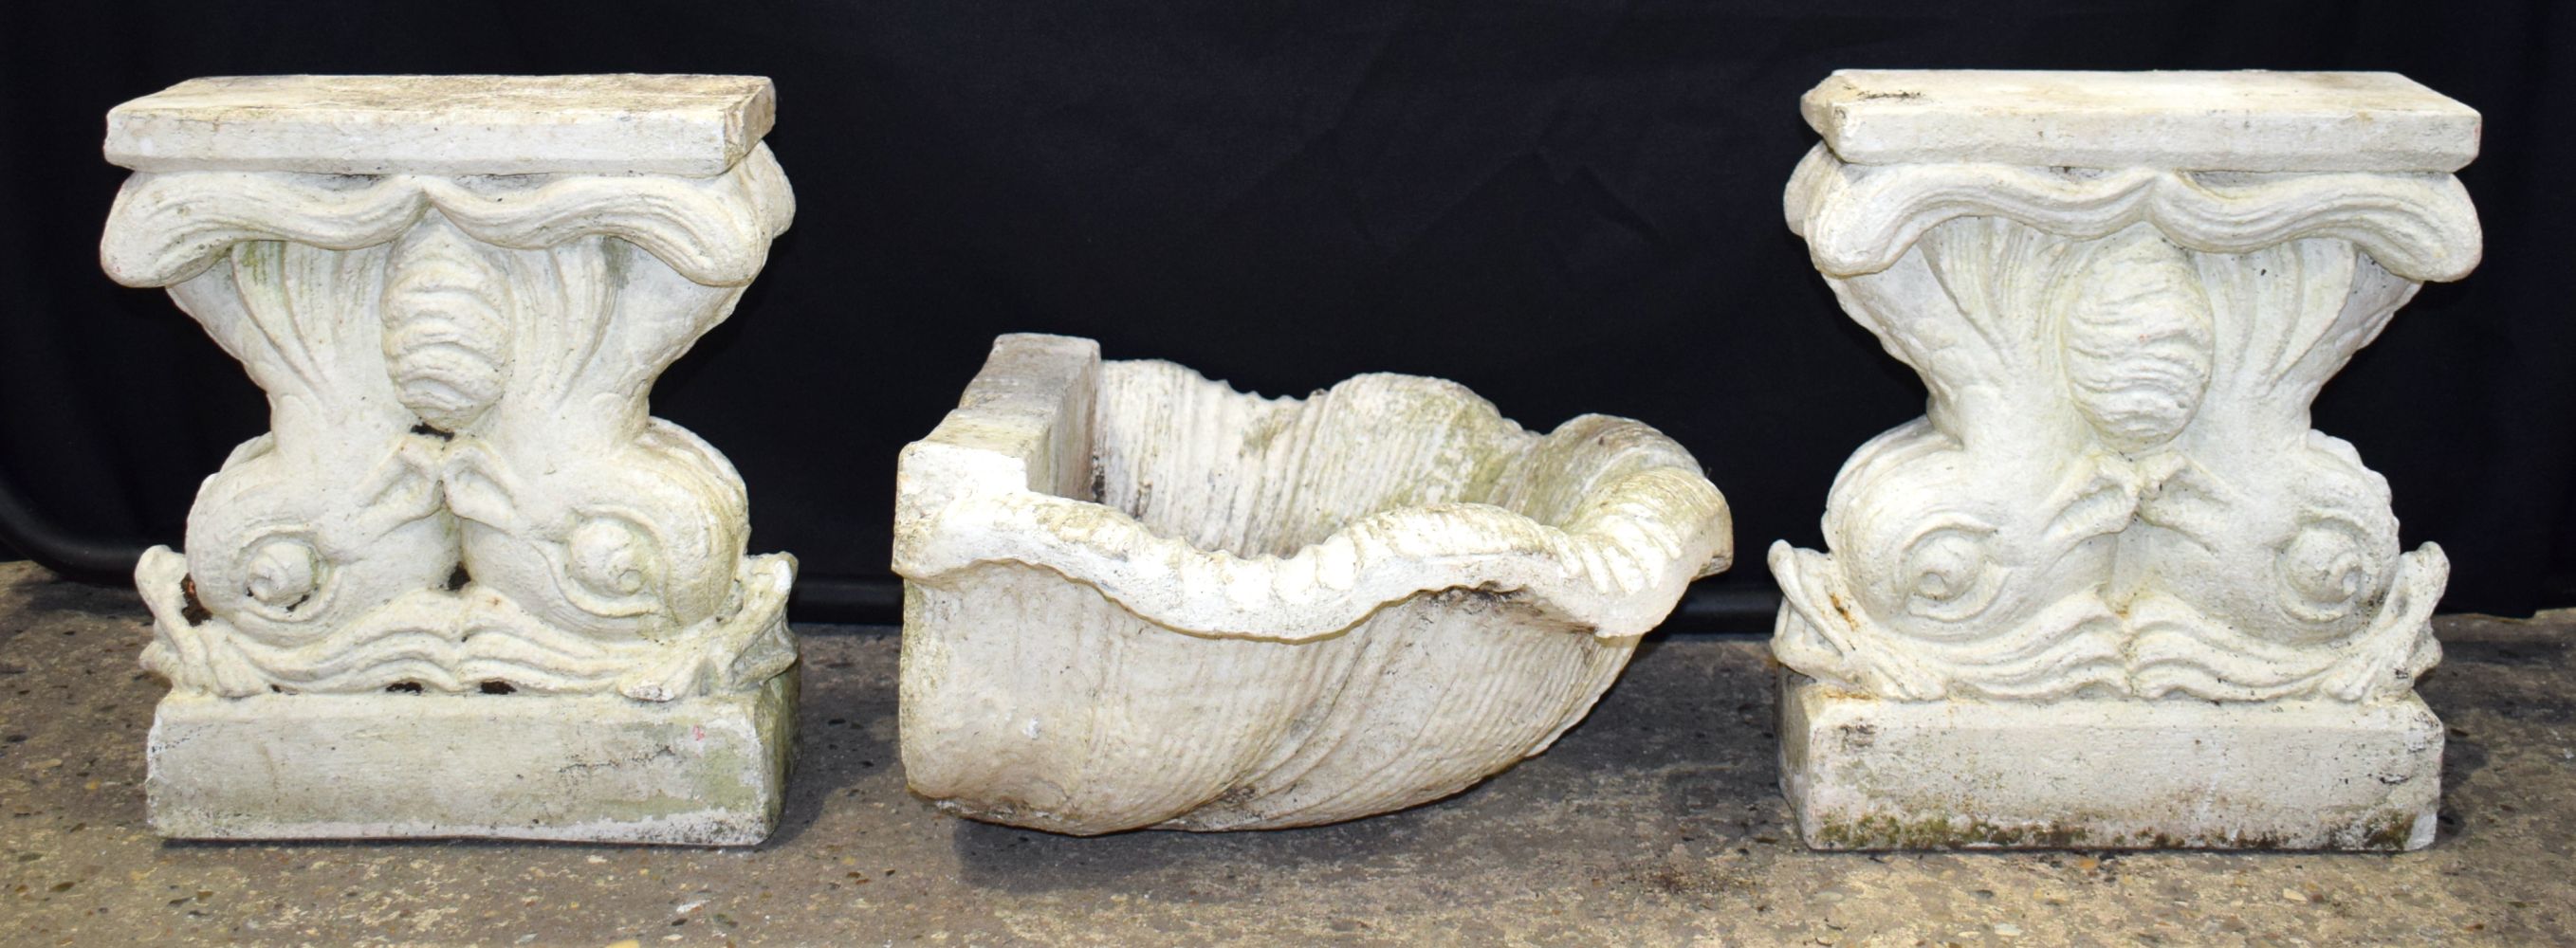 A pair of Italian Agostino Papini stone bench pillars together with a Conch shell water feature - Image 6 of 8